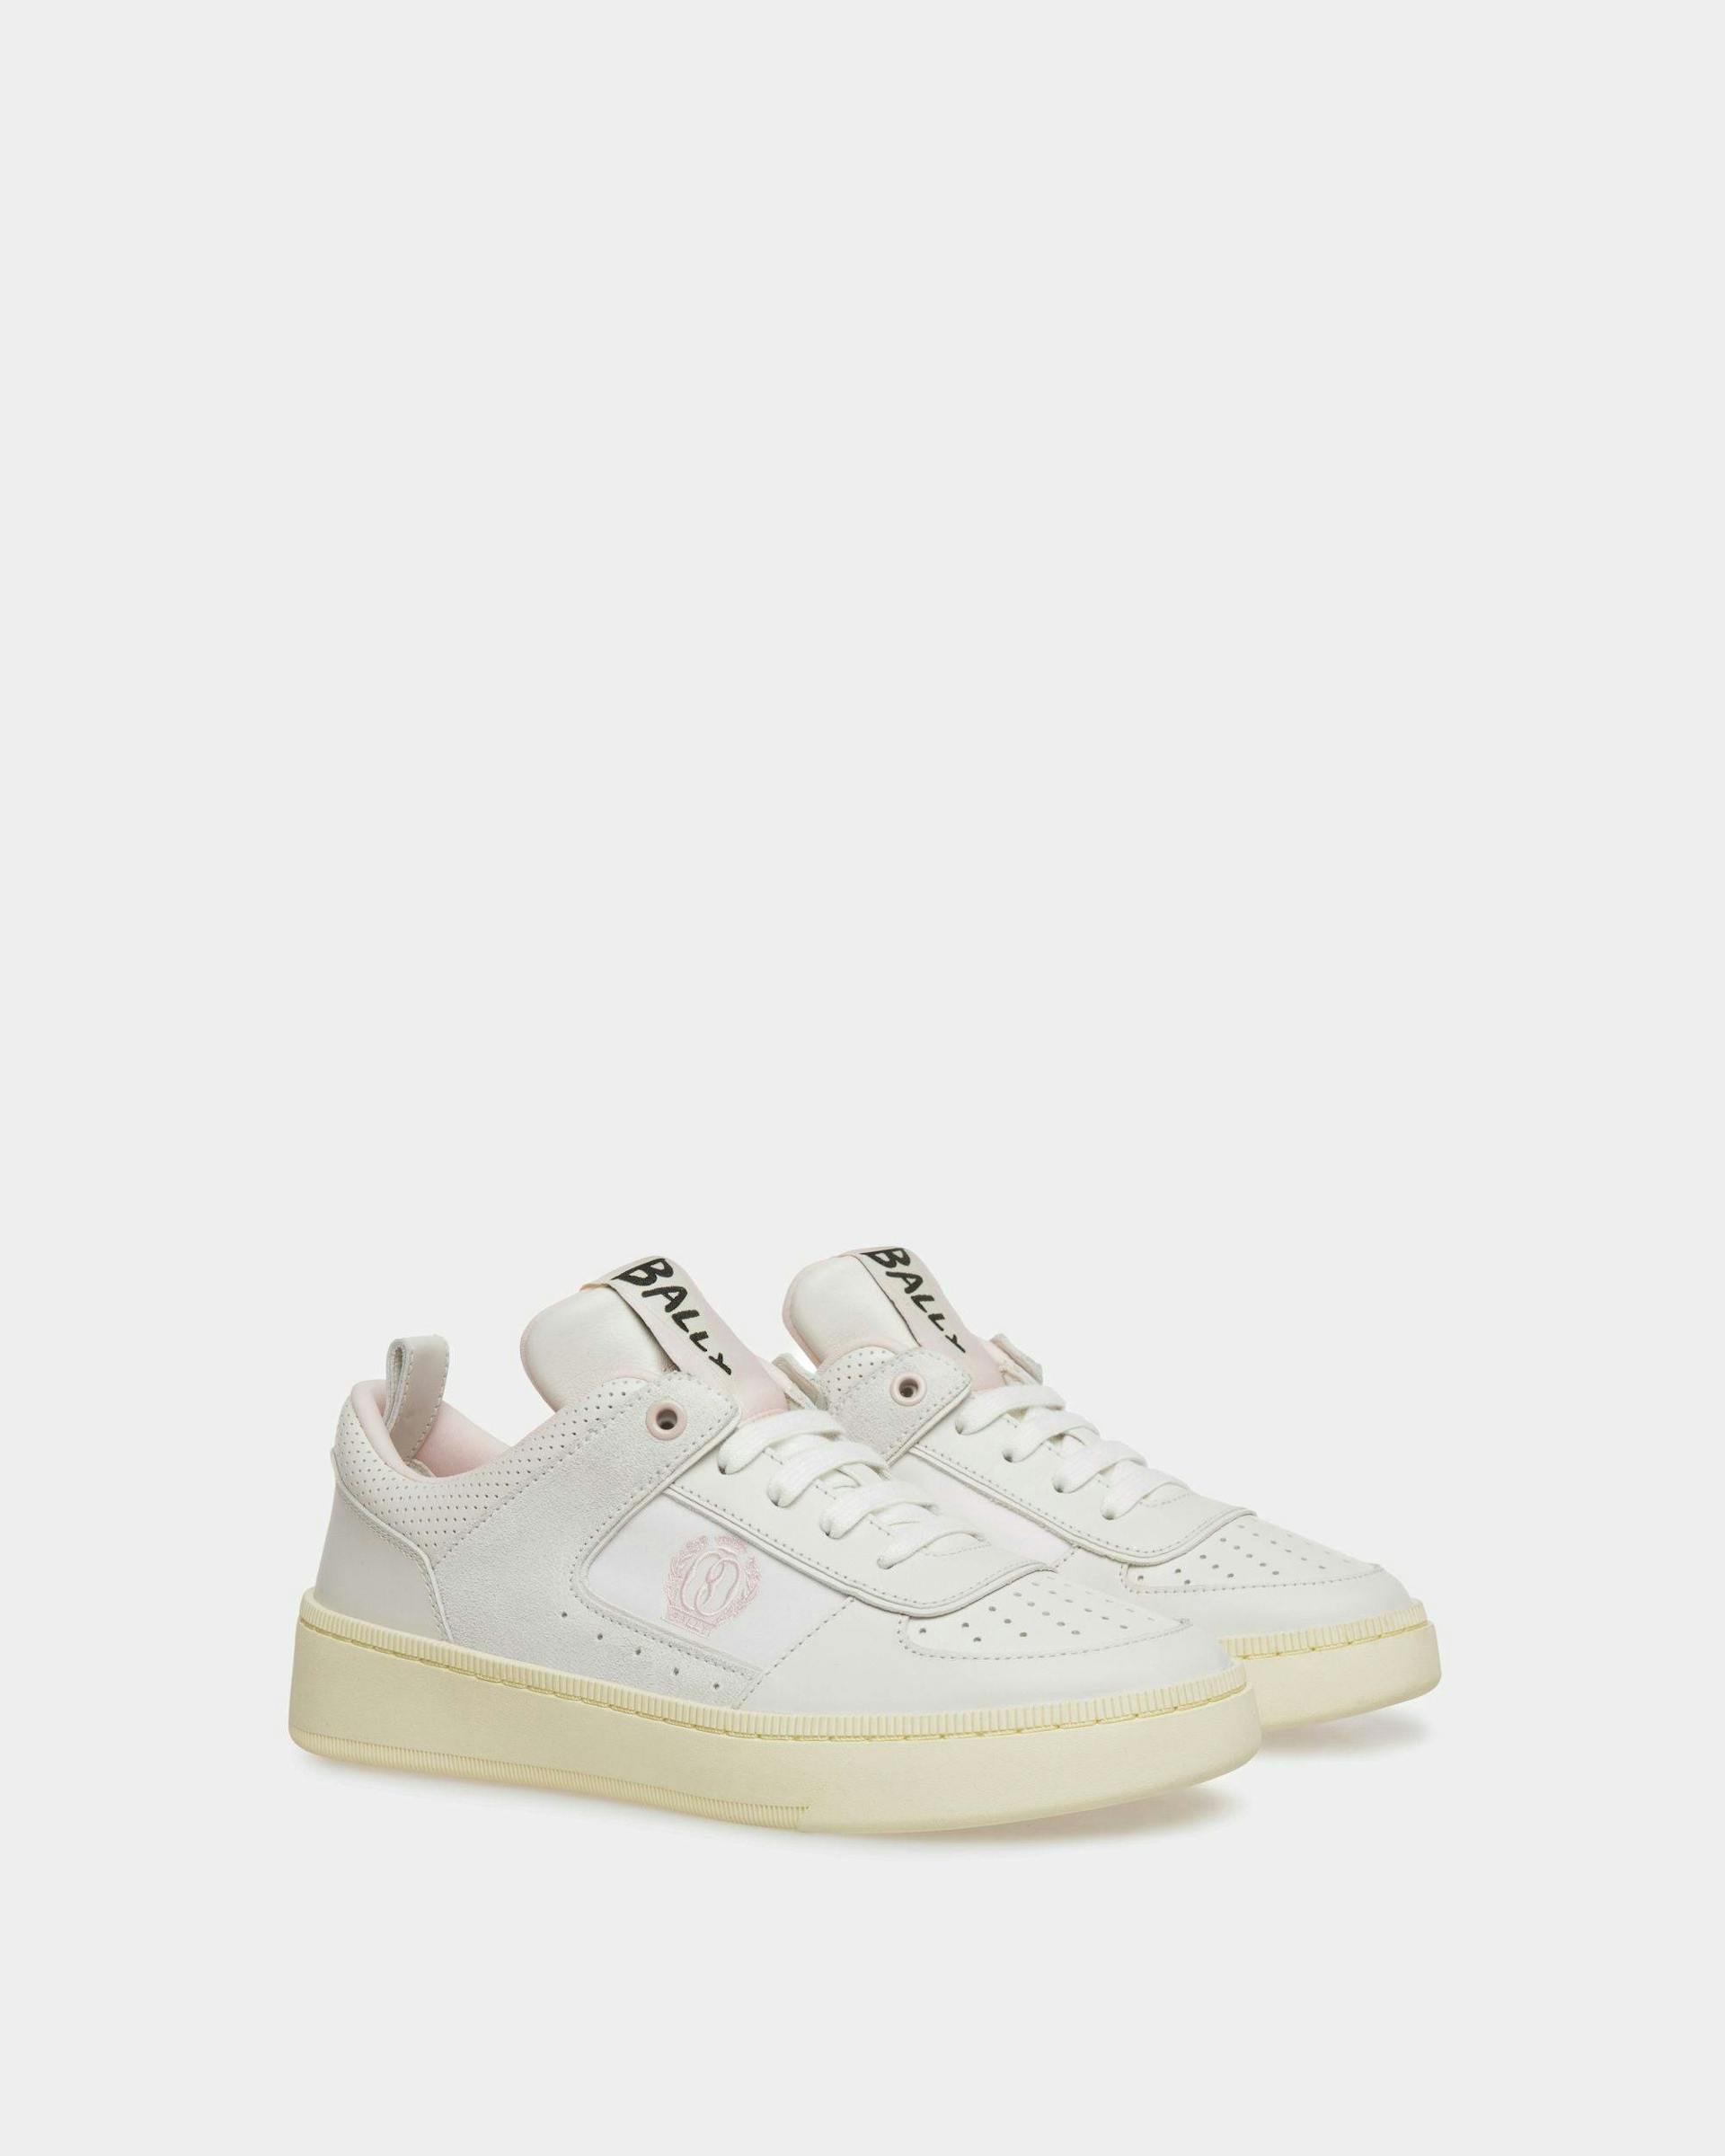 Women's Raise Sneakers In White And Pink Leather | Bally | Still Life 3/4 Front